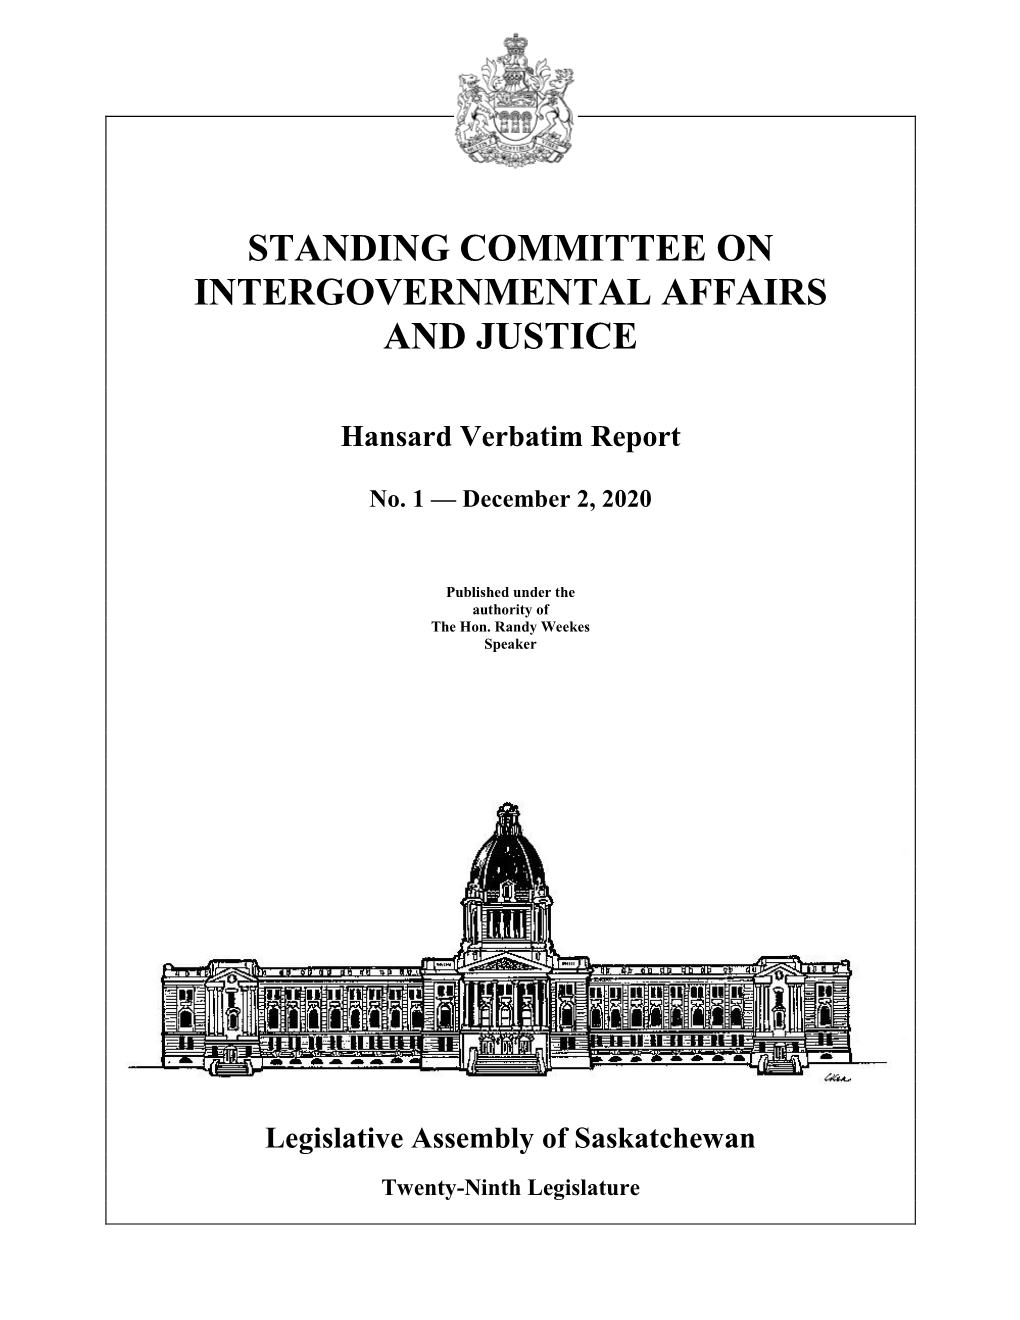 December 2, 2020 Intergovernmental Affairs and Justice Committee